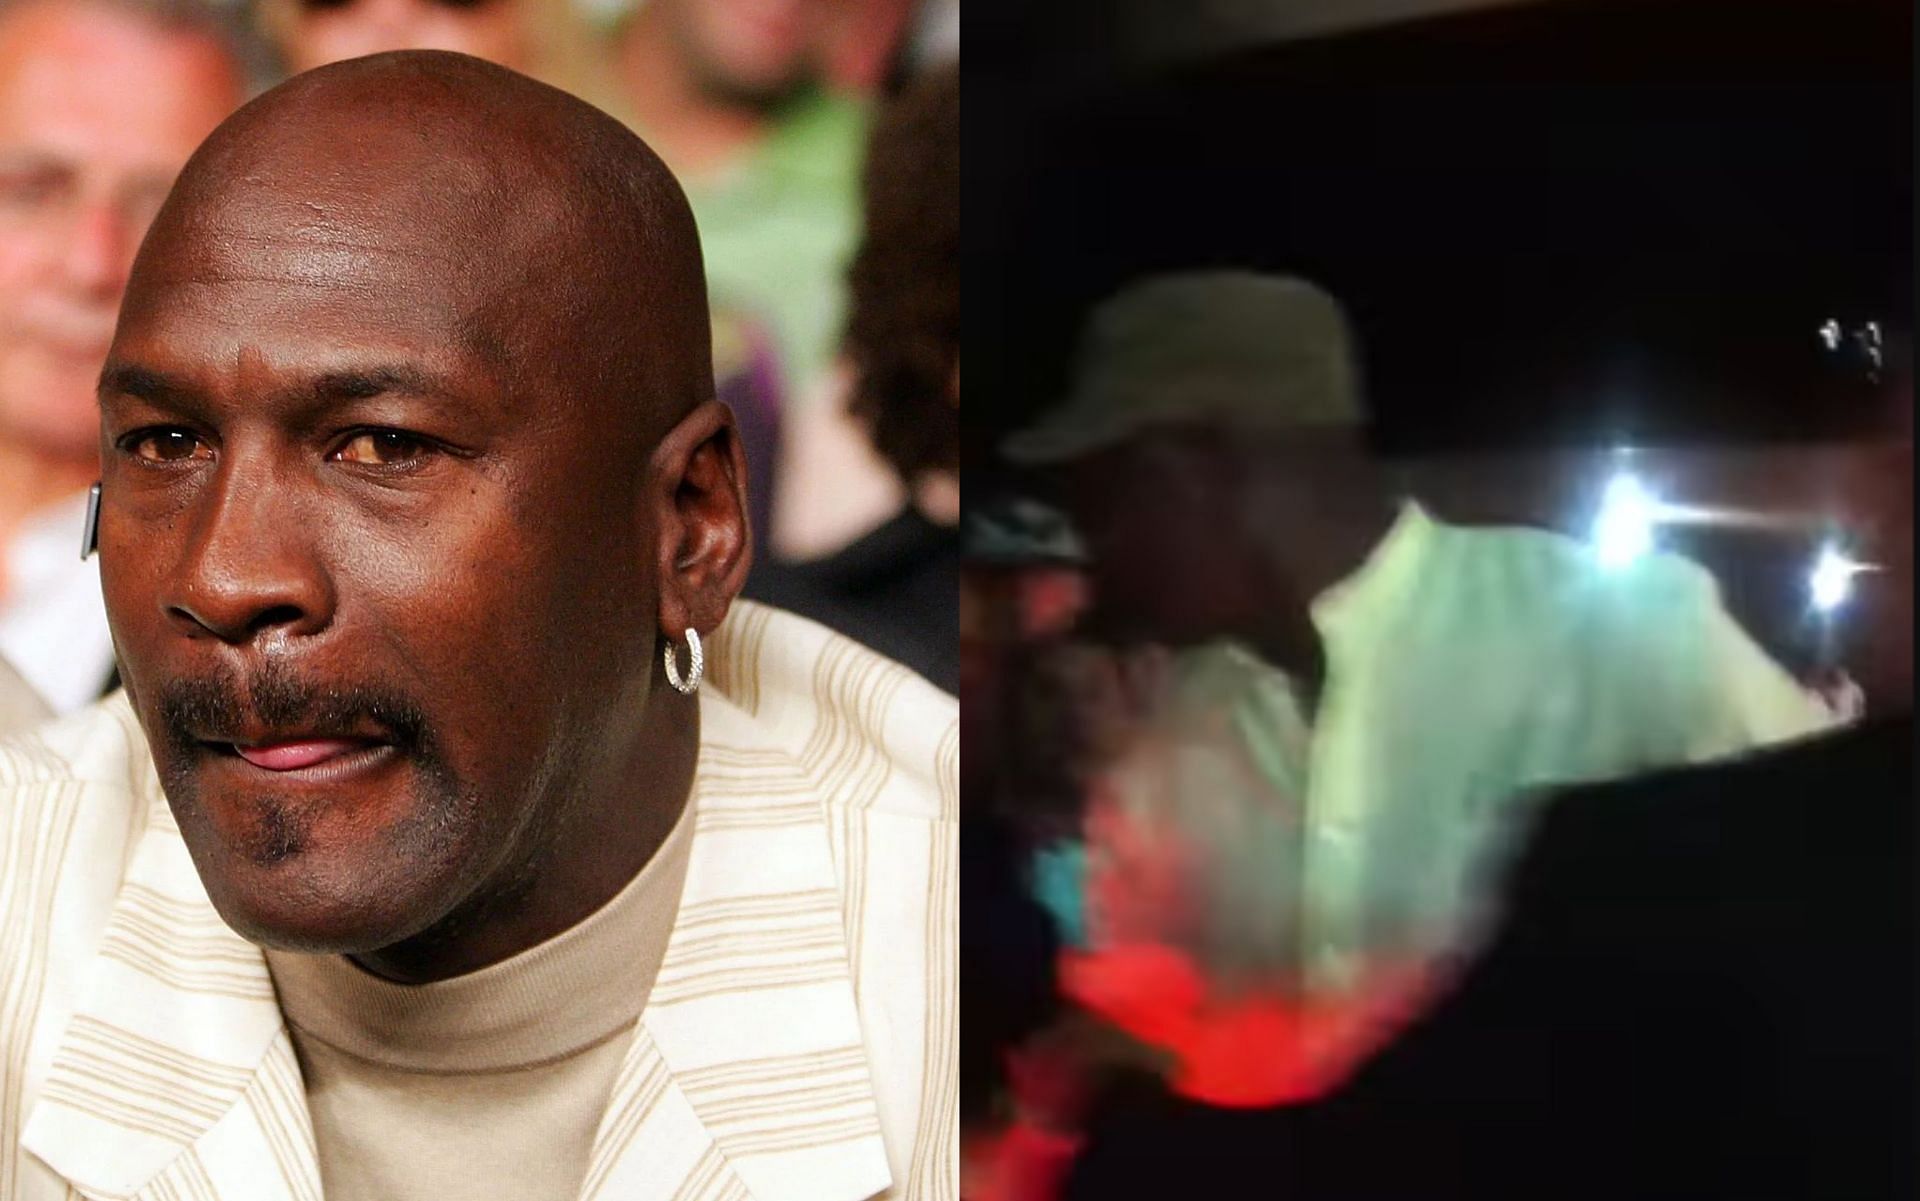 Michael Jordan (L), and a fight that nearly broke out after Pacquiao vs. Mayweather (R).